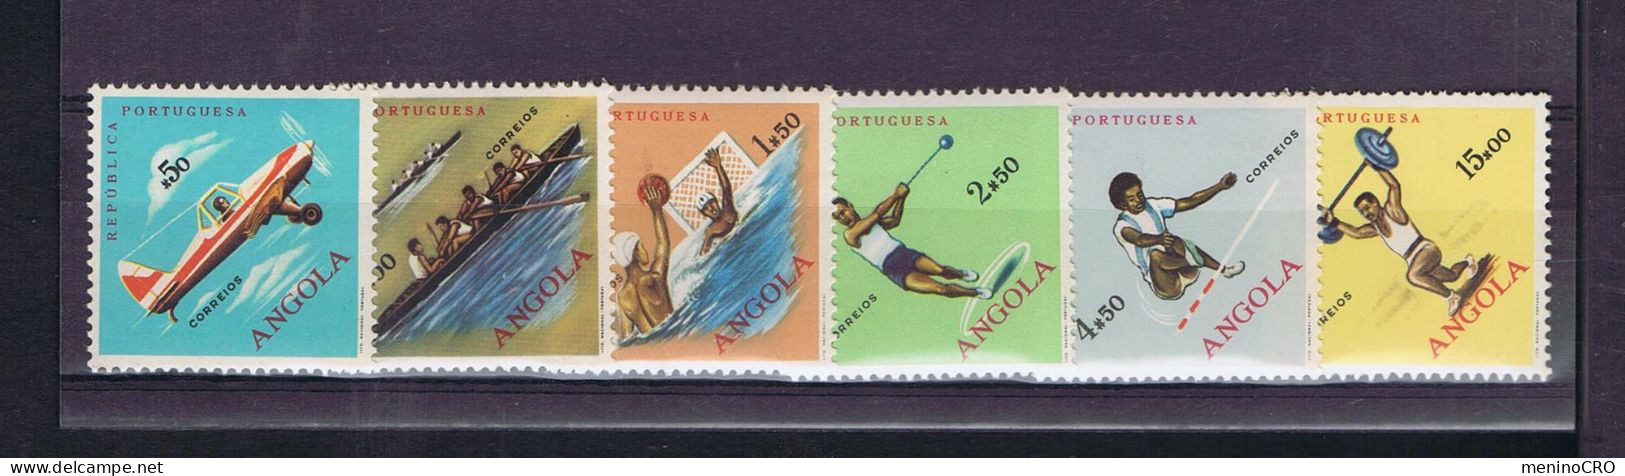 Gc8058 ANGOLA Sports Divers 1962 Set 6v. Mint Issue Portugal - Jumping